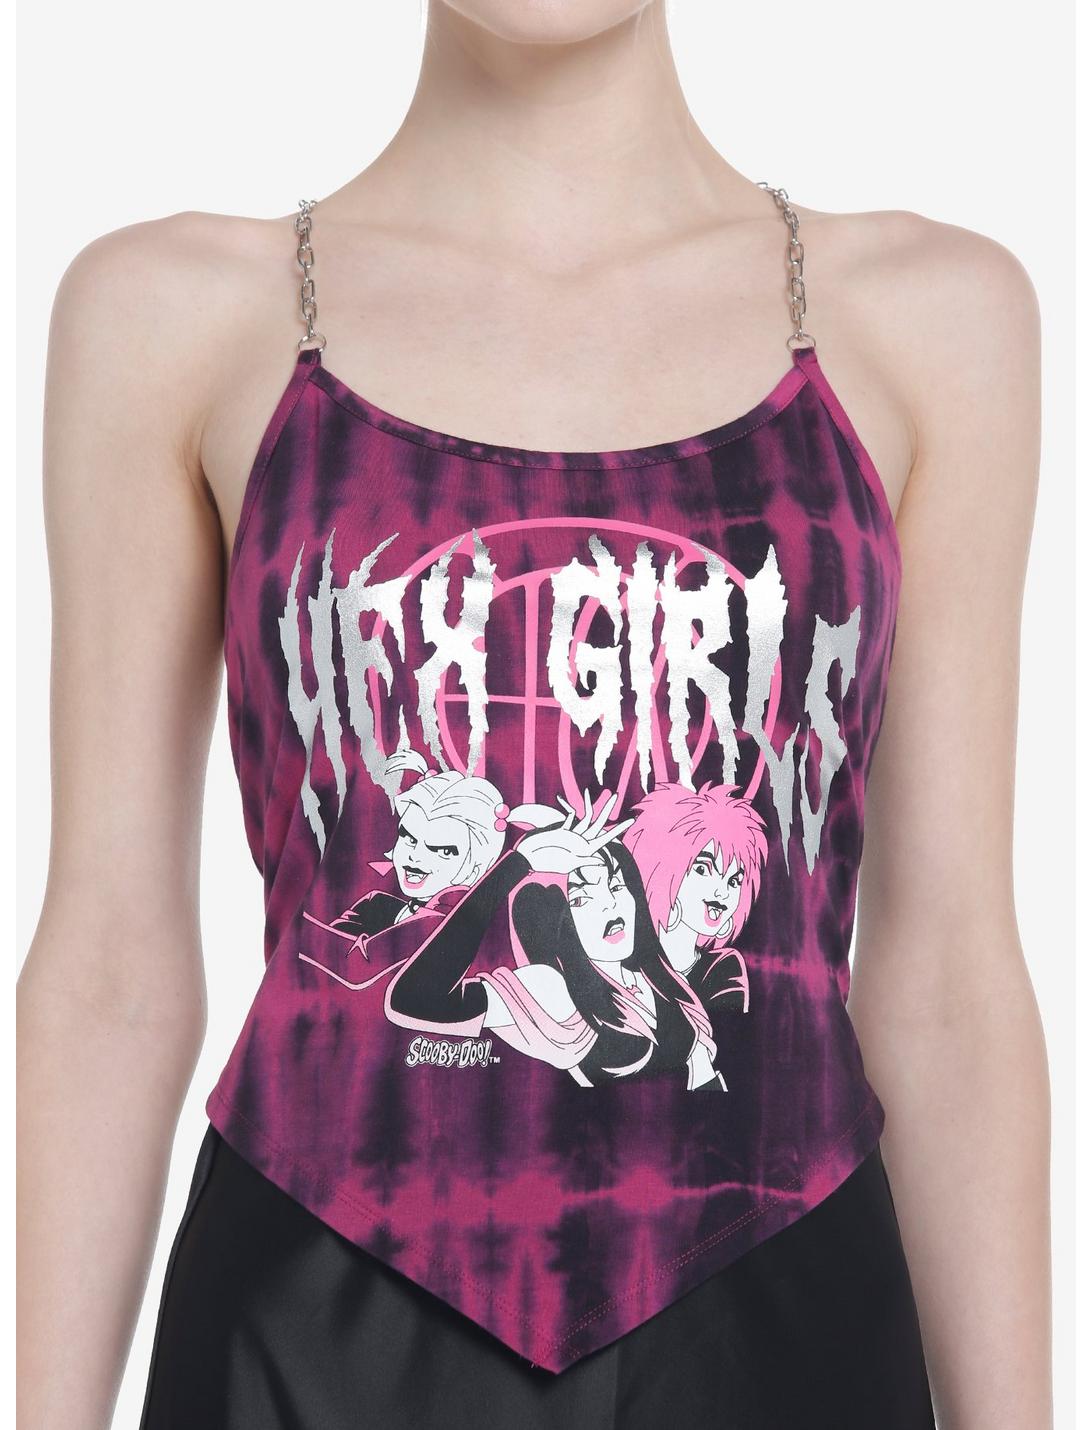 Scooby-Doo! The Hex Girls Chain Strap Girls Cami, MULTI, hi-res